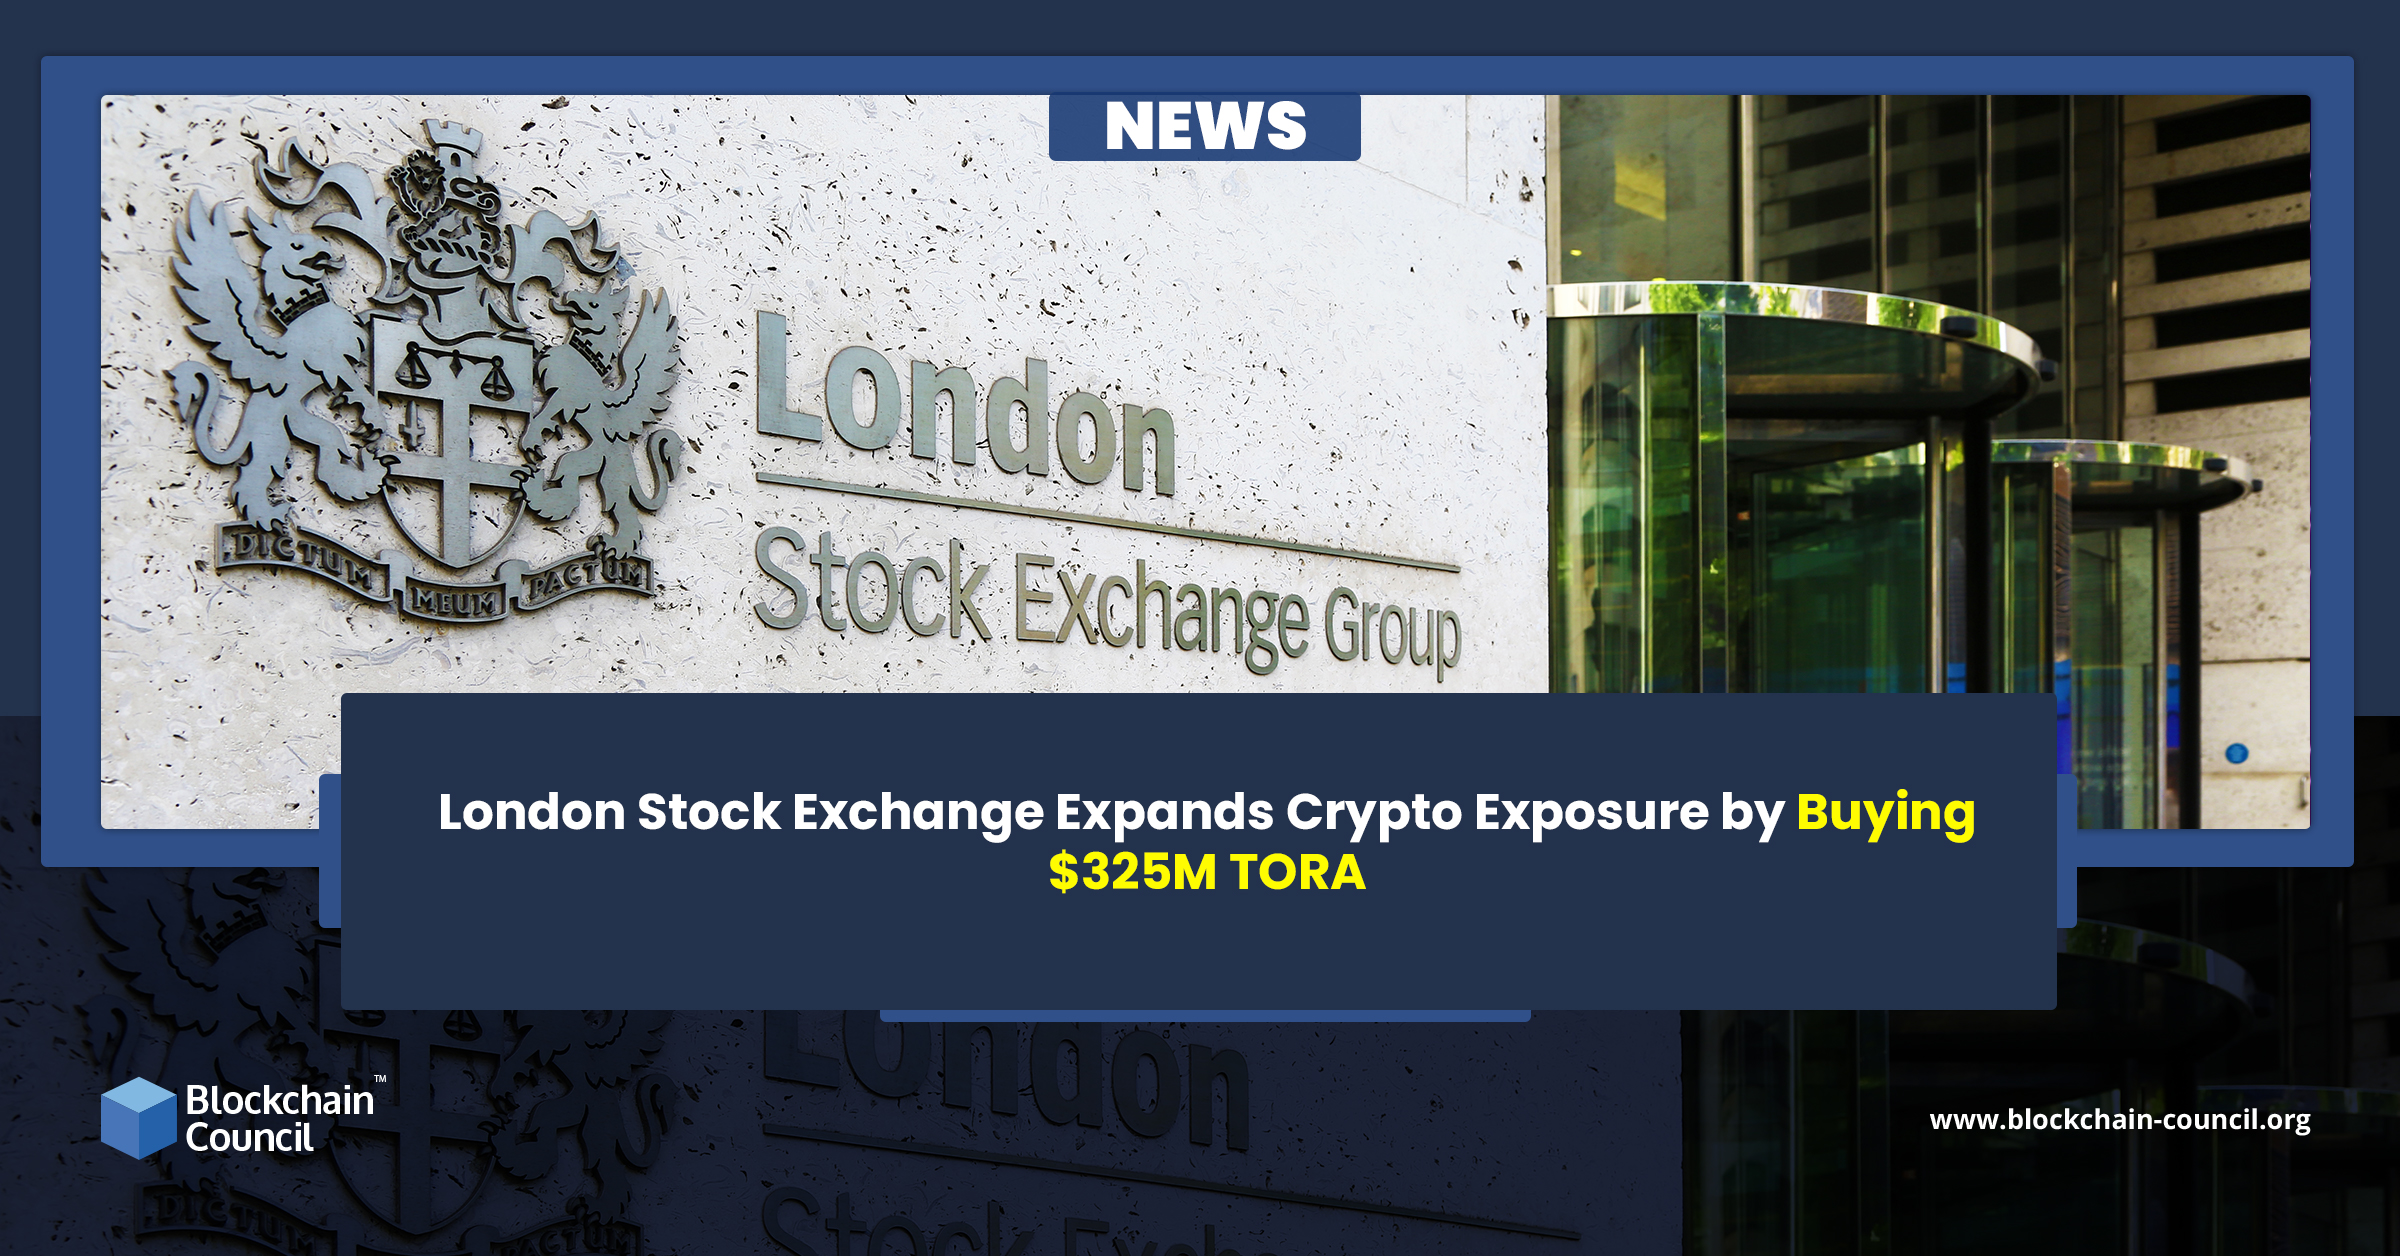 London Stock Exchange Expands Crypto Exposure by Buying $325M TORA